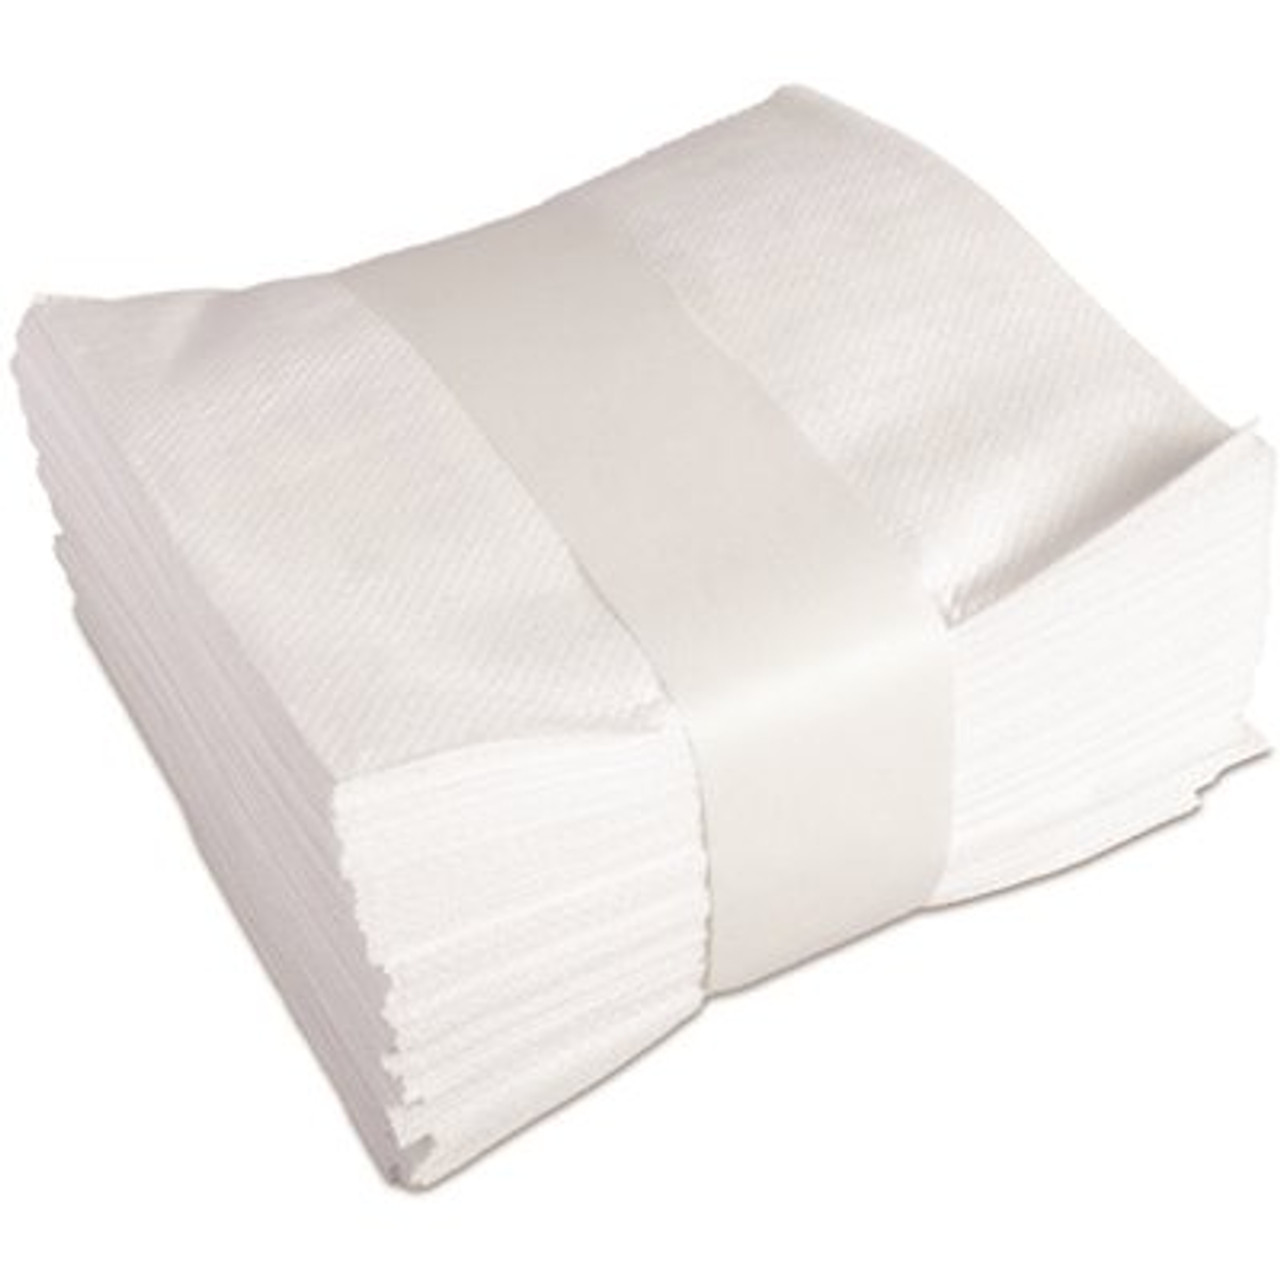 UNIFORE Unifore Polypropylene Surface Wipes 1280-pack